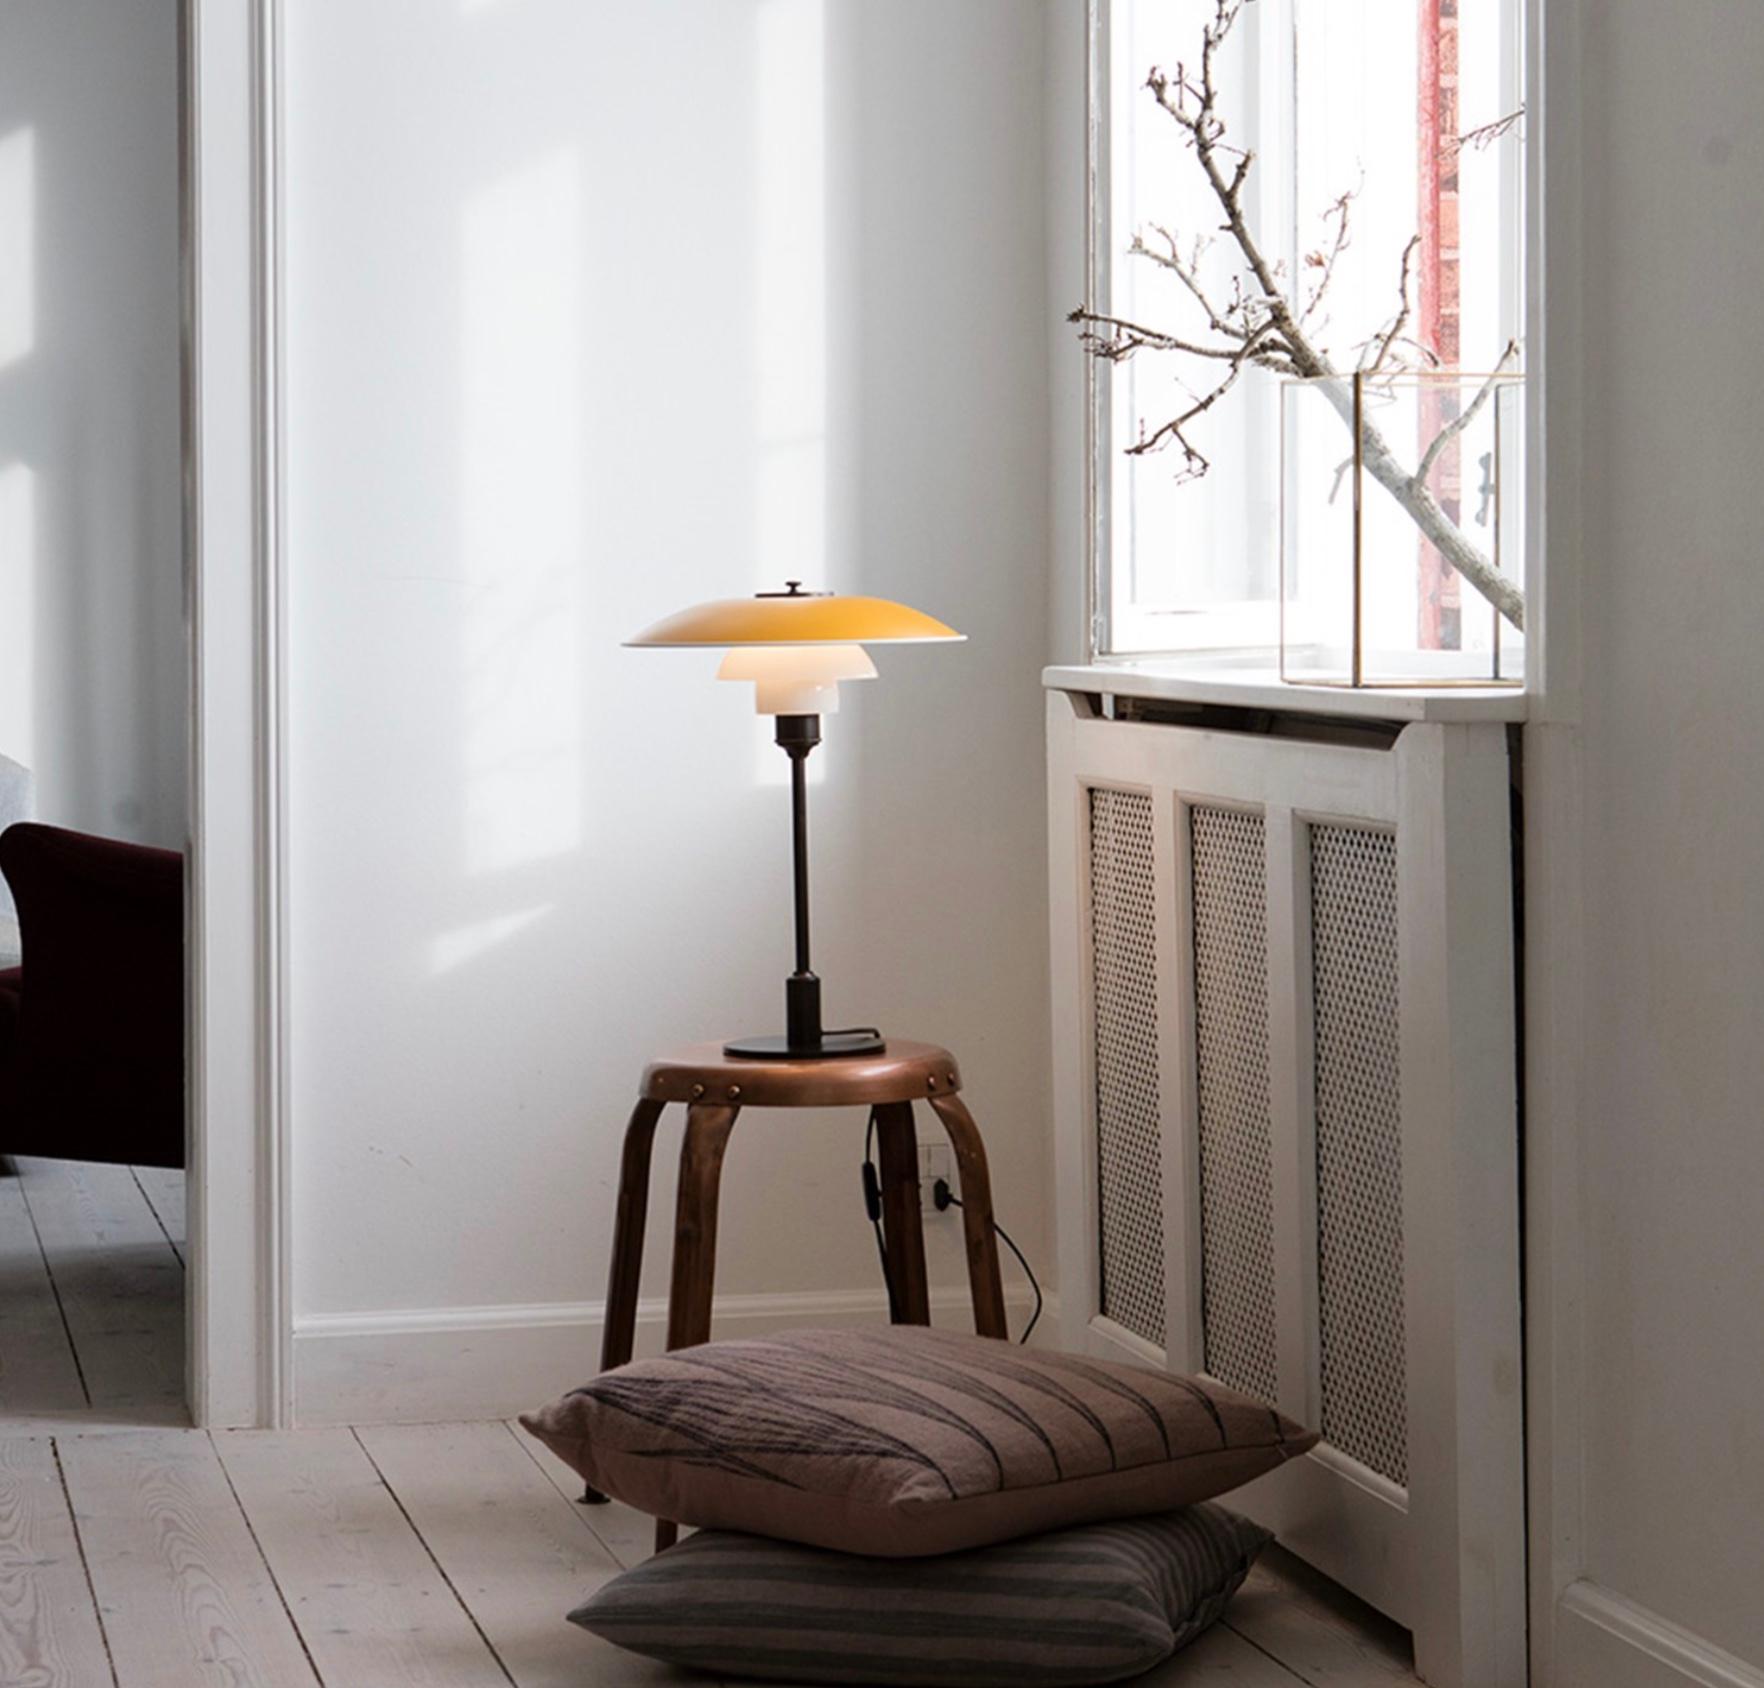 Pouls Henningsen PH 3½-2½ Table Lamp. Denmark, designed 1928, new, current production. 

PH 3 ½-2 ½ Table was designed in 1928 and is one of many development projects undertaken by PH in connection with the development of his world-famous